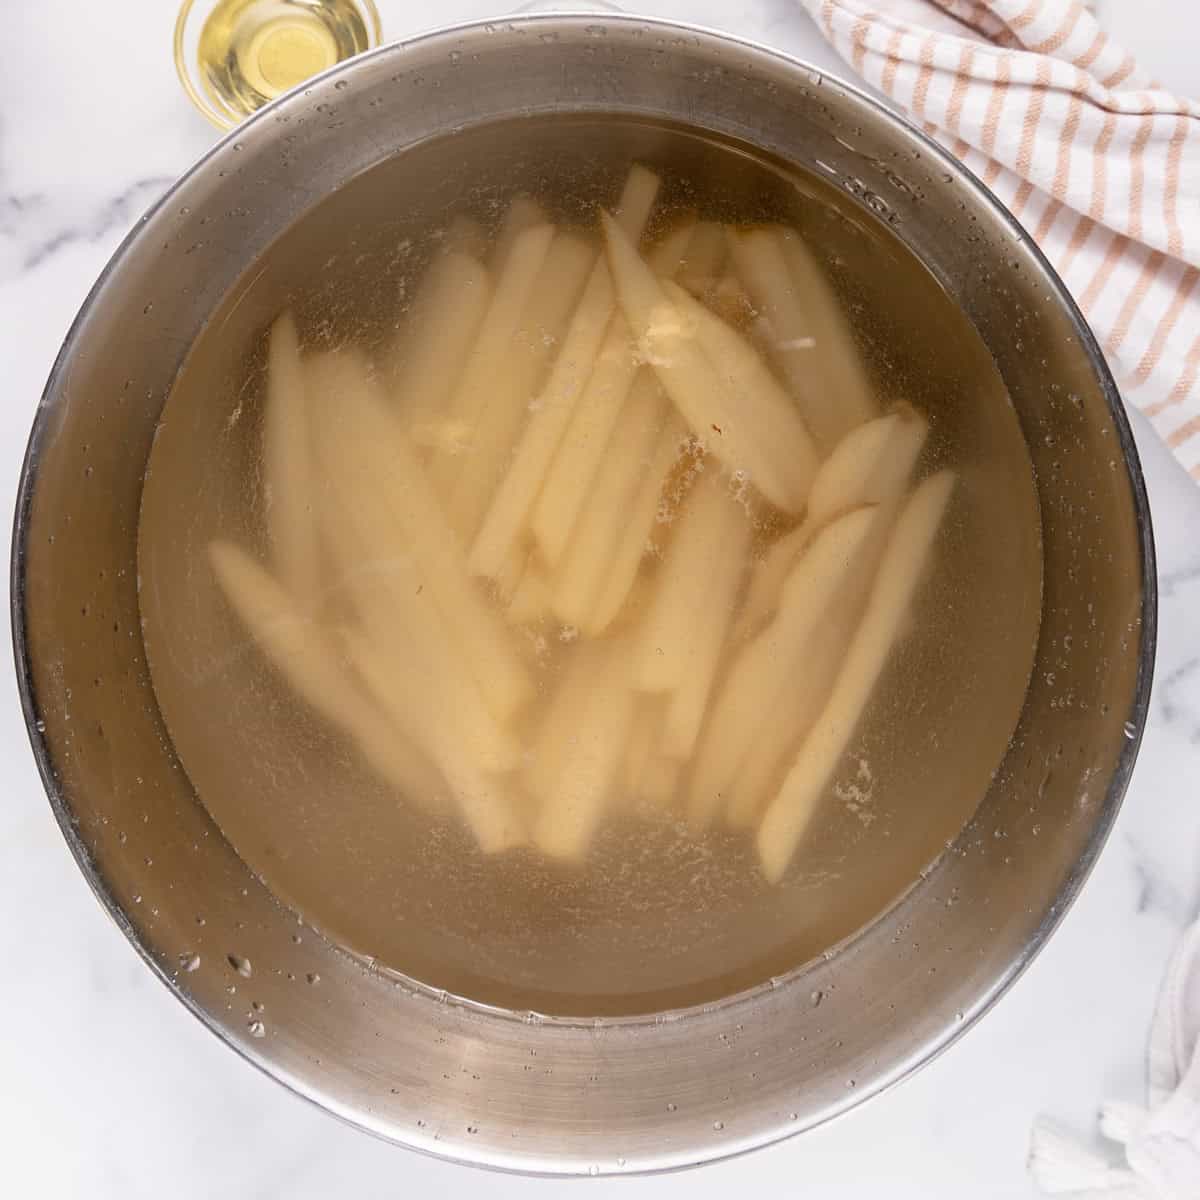 A metal bowl holding french fries soaked in water.